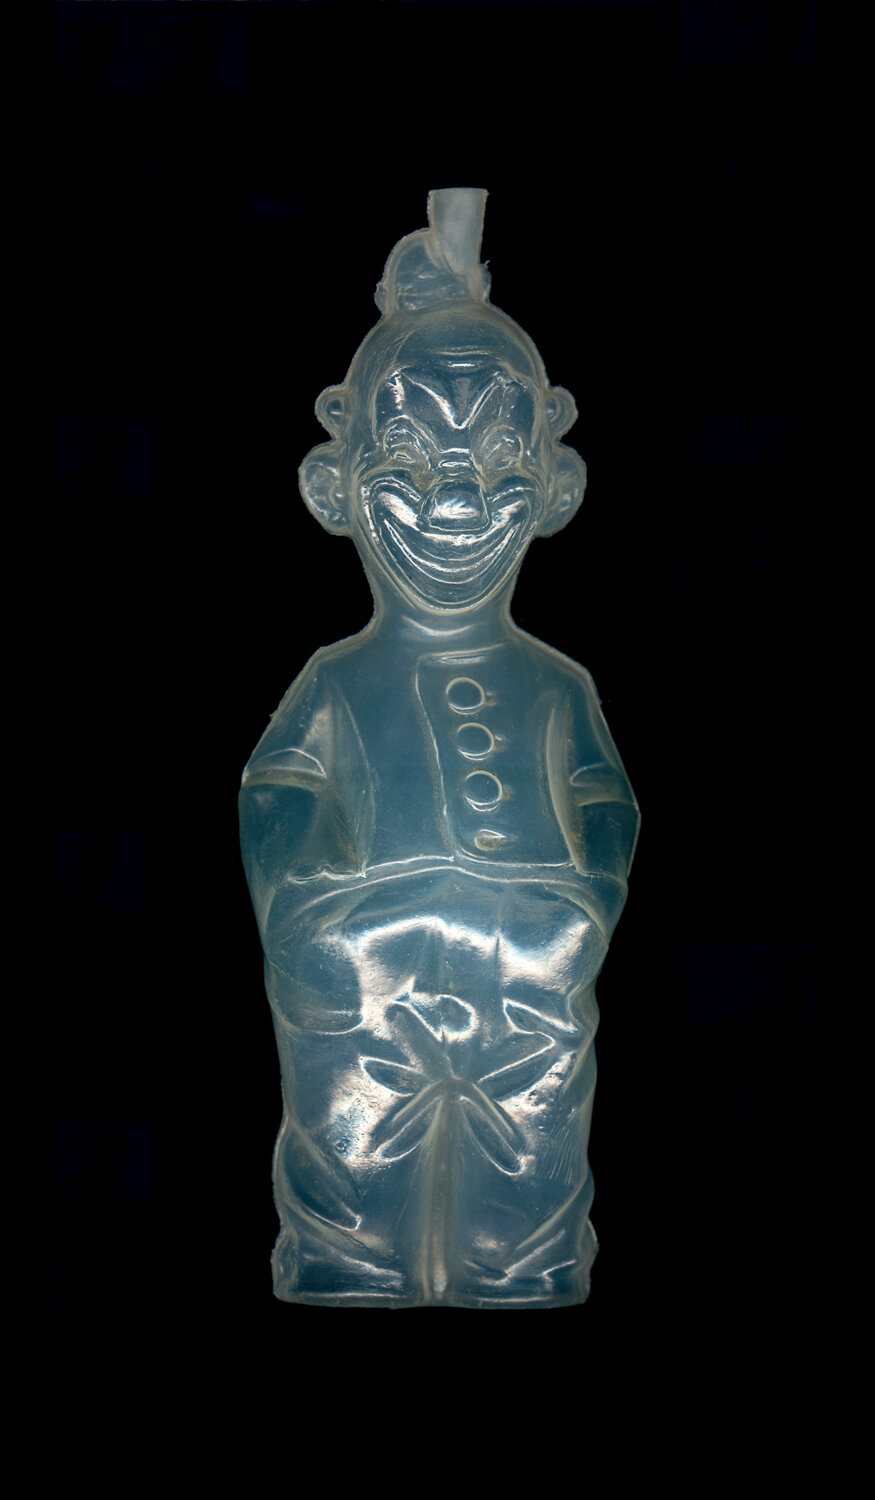 Clown cordial container